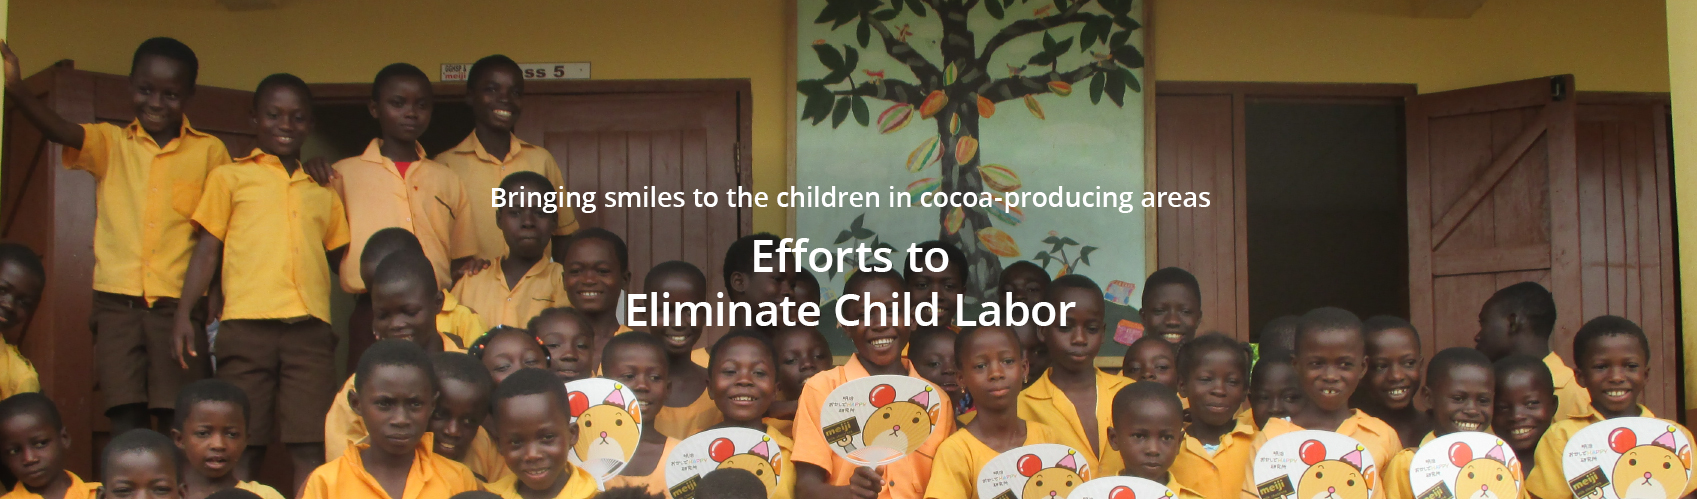 Bringing smiles to the children in cocoa-producing areas